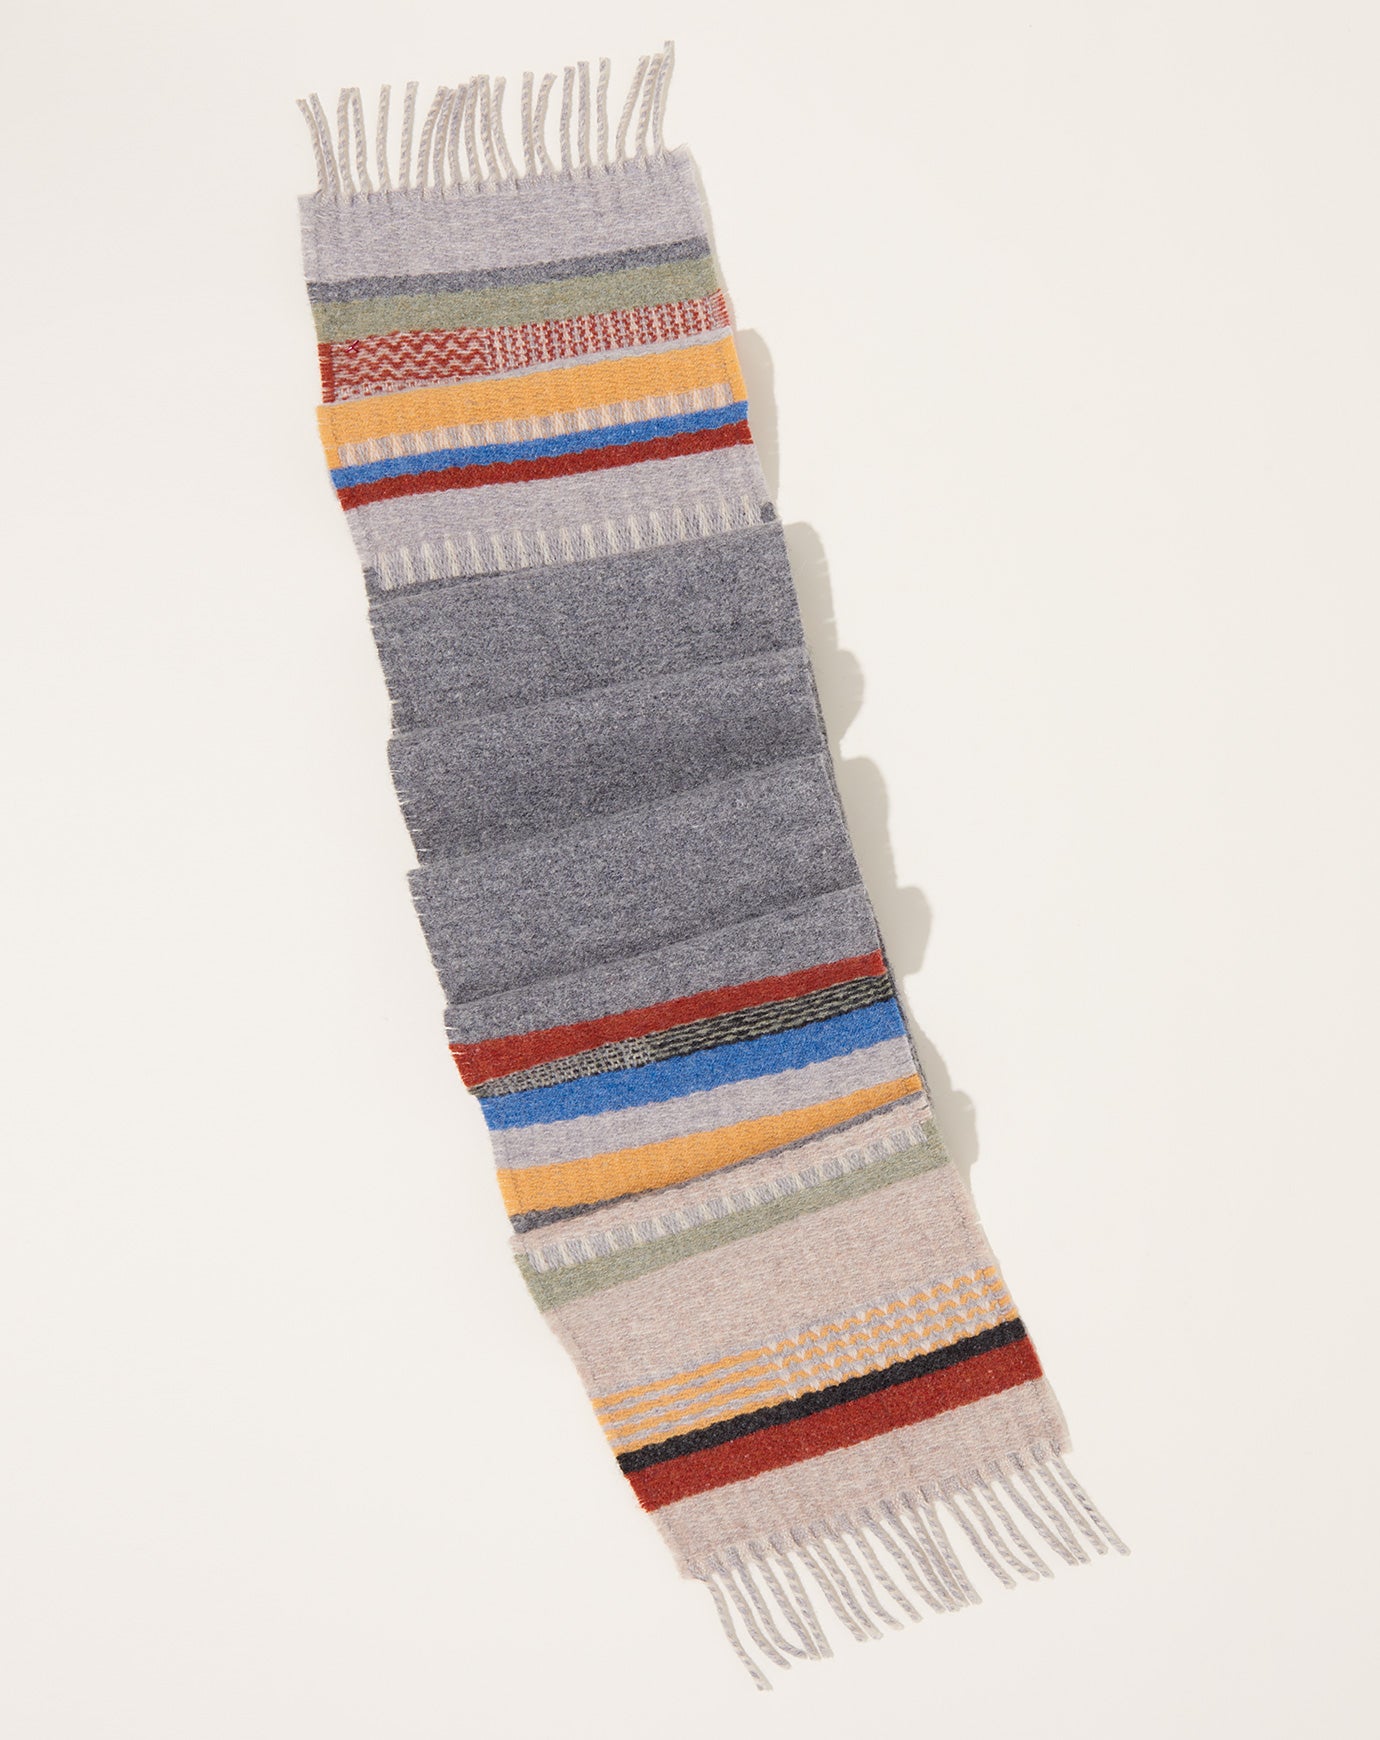 Wallace Sewell Darland Scarf in Grey